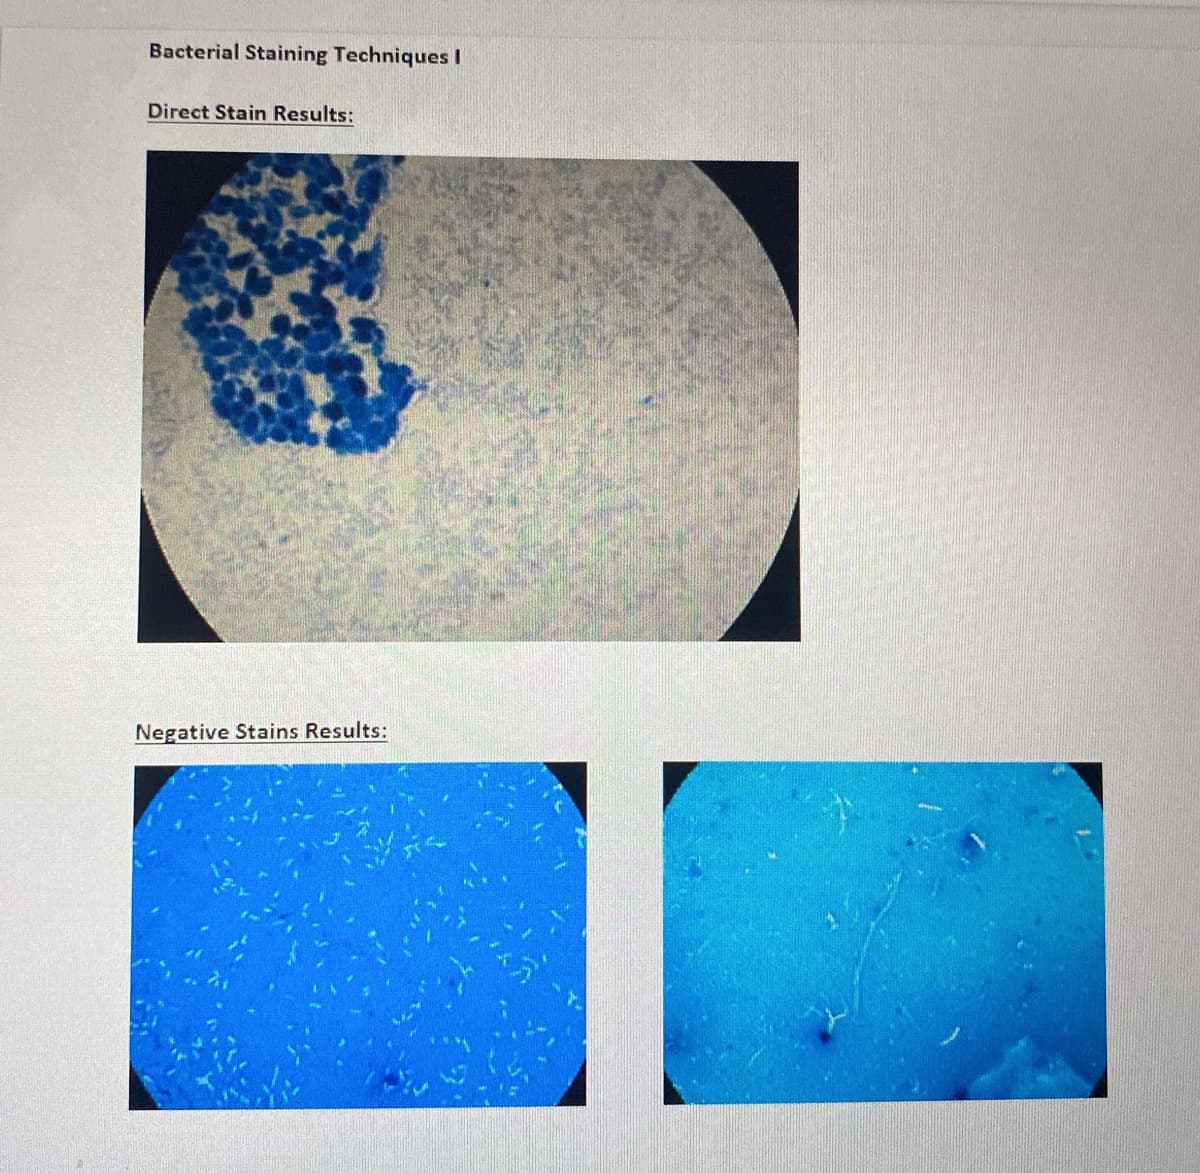 Bacterial Staining Techniques I
Direct Stain Results:
Negative Stains Results:
